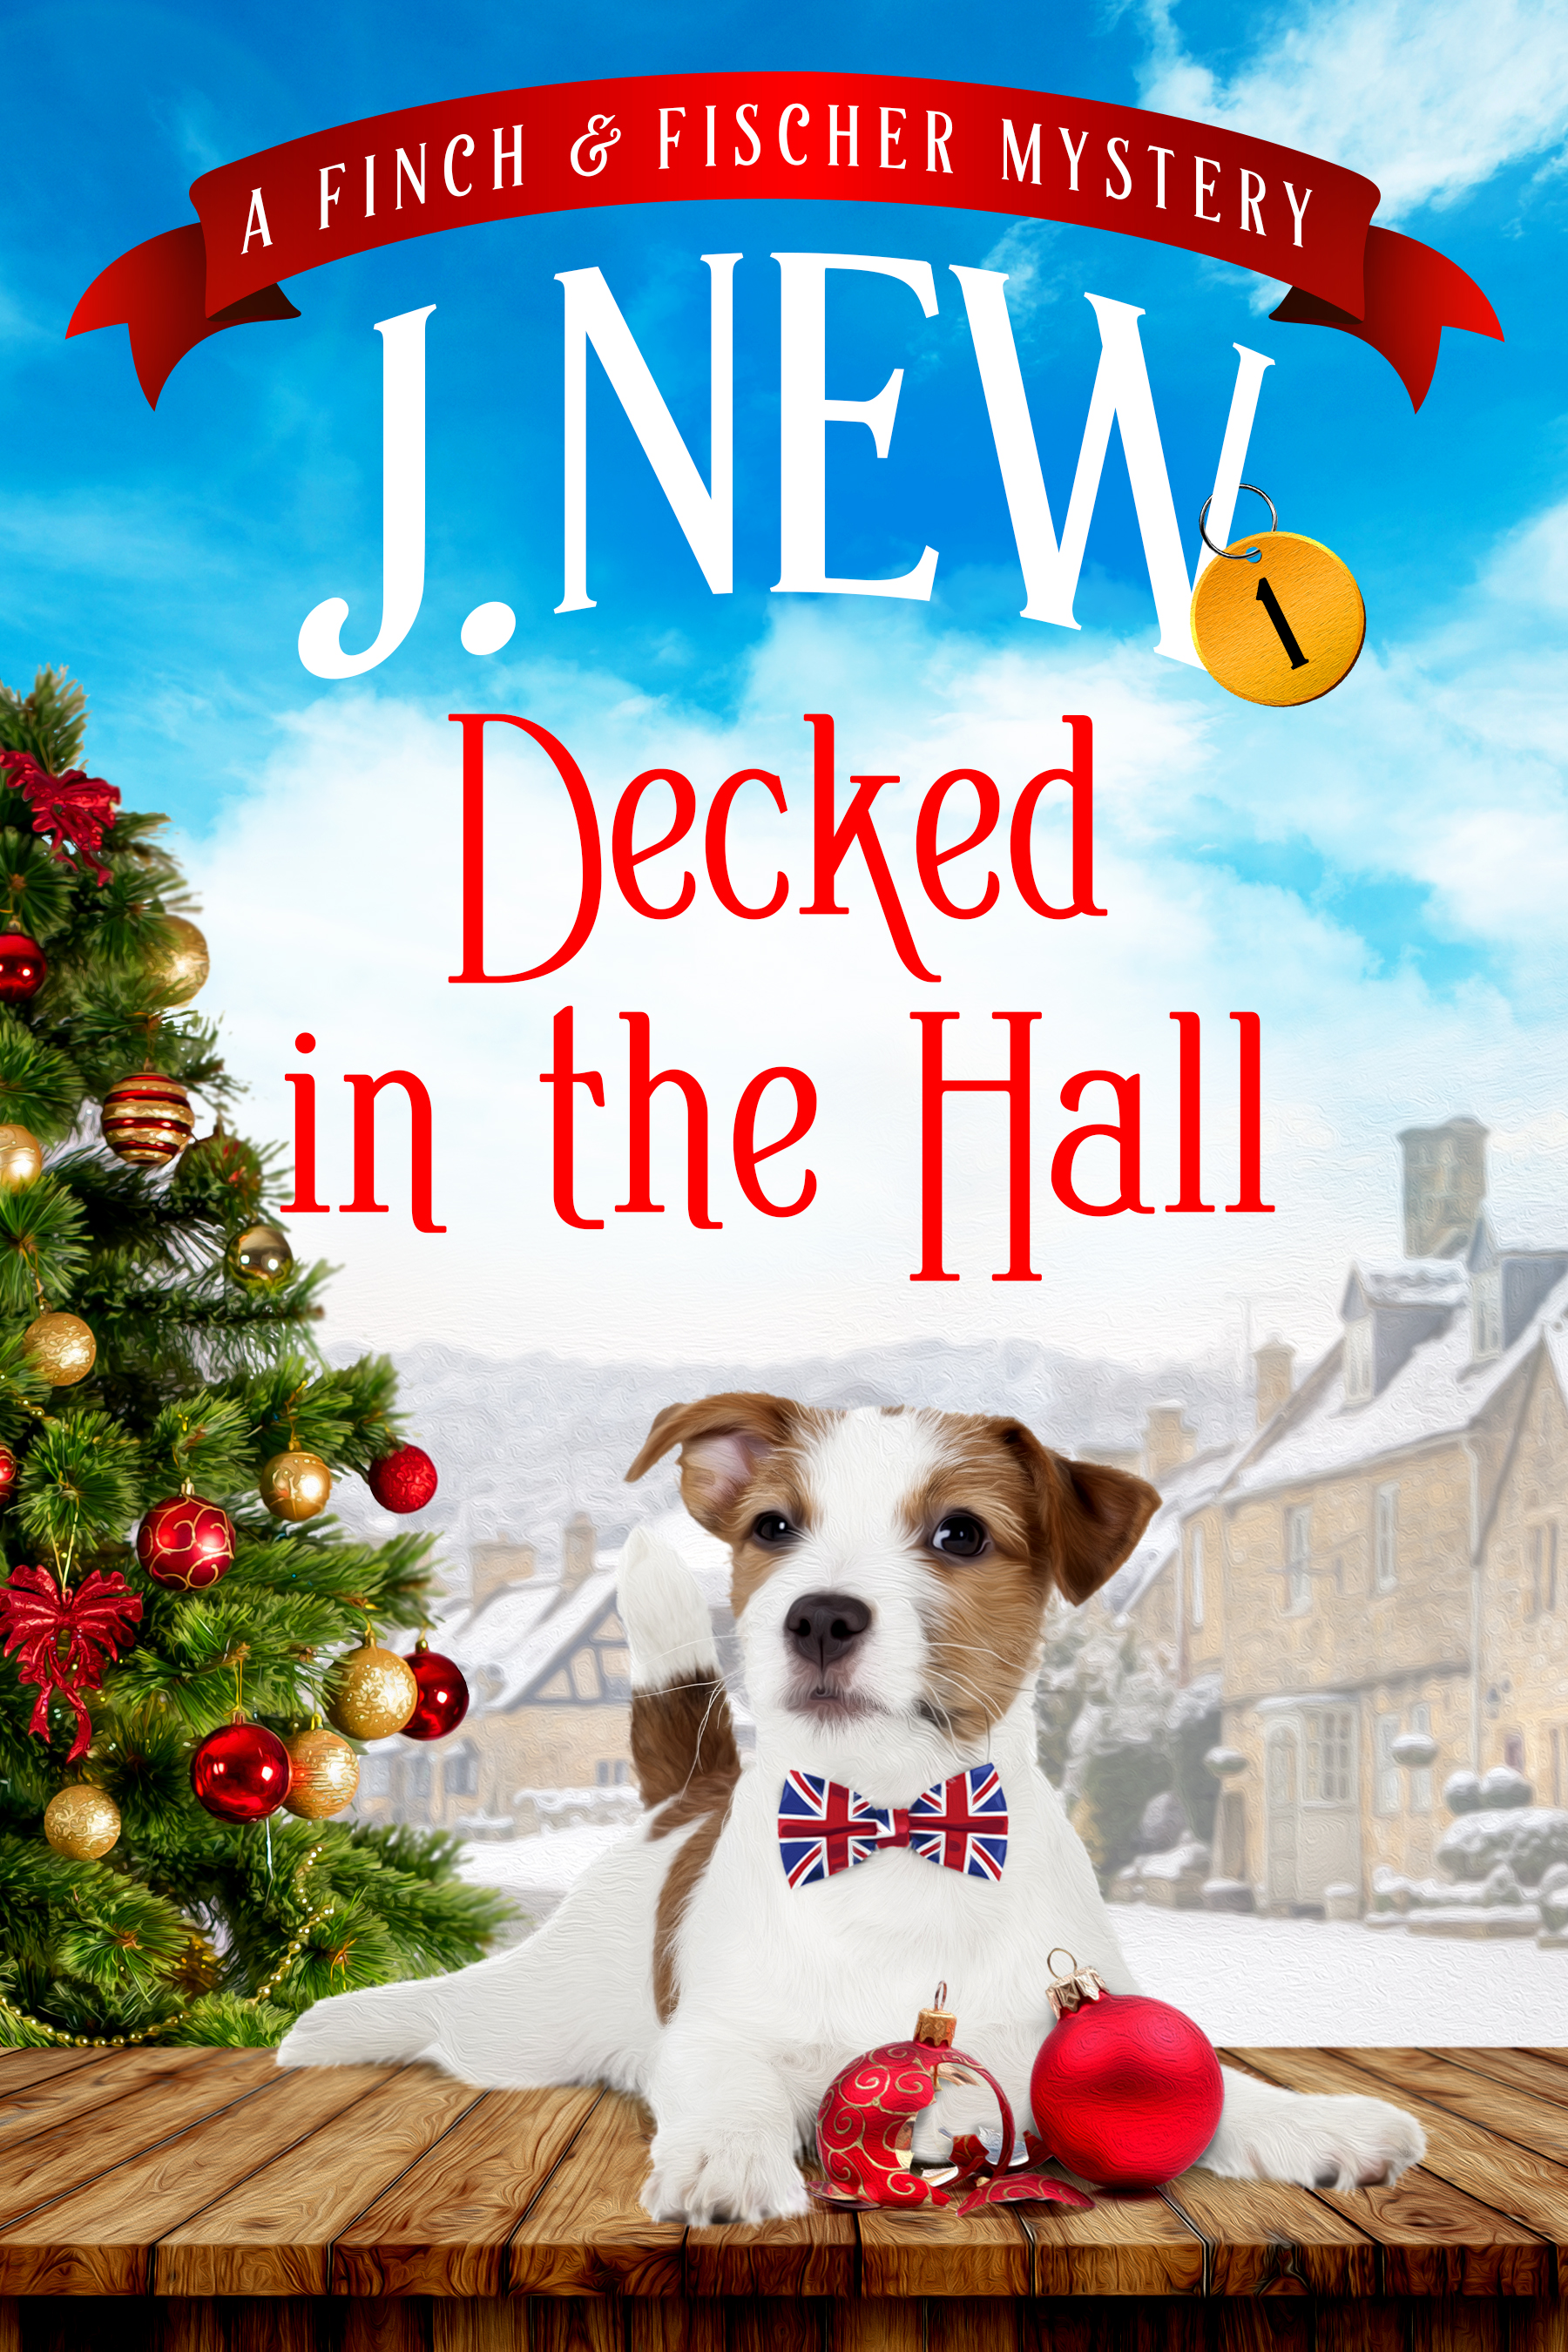 Decked in the Hall the first exciting and humorous book in the popular cozy mystery series featuring Mobile Librarian Penny Finch and her cute and clever dog detective Fischer